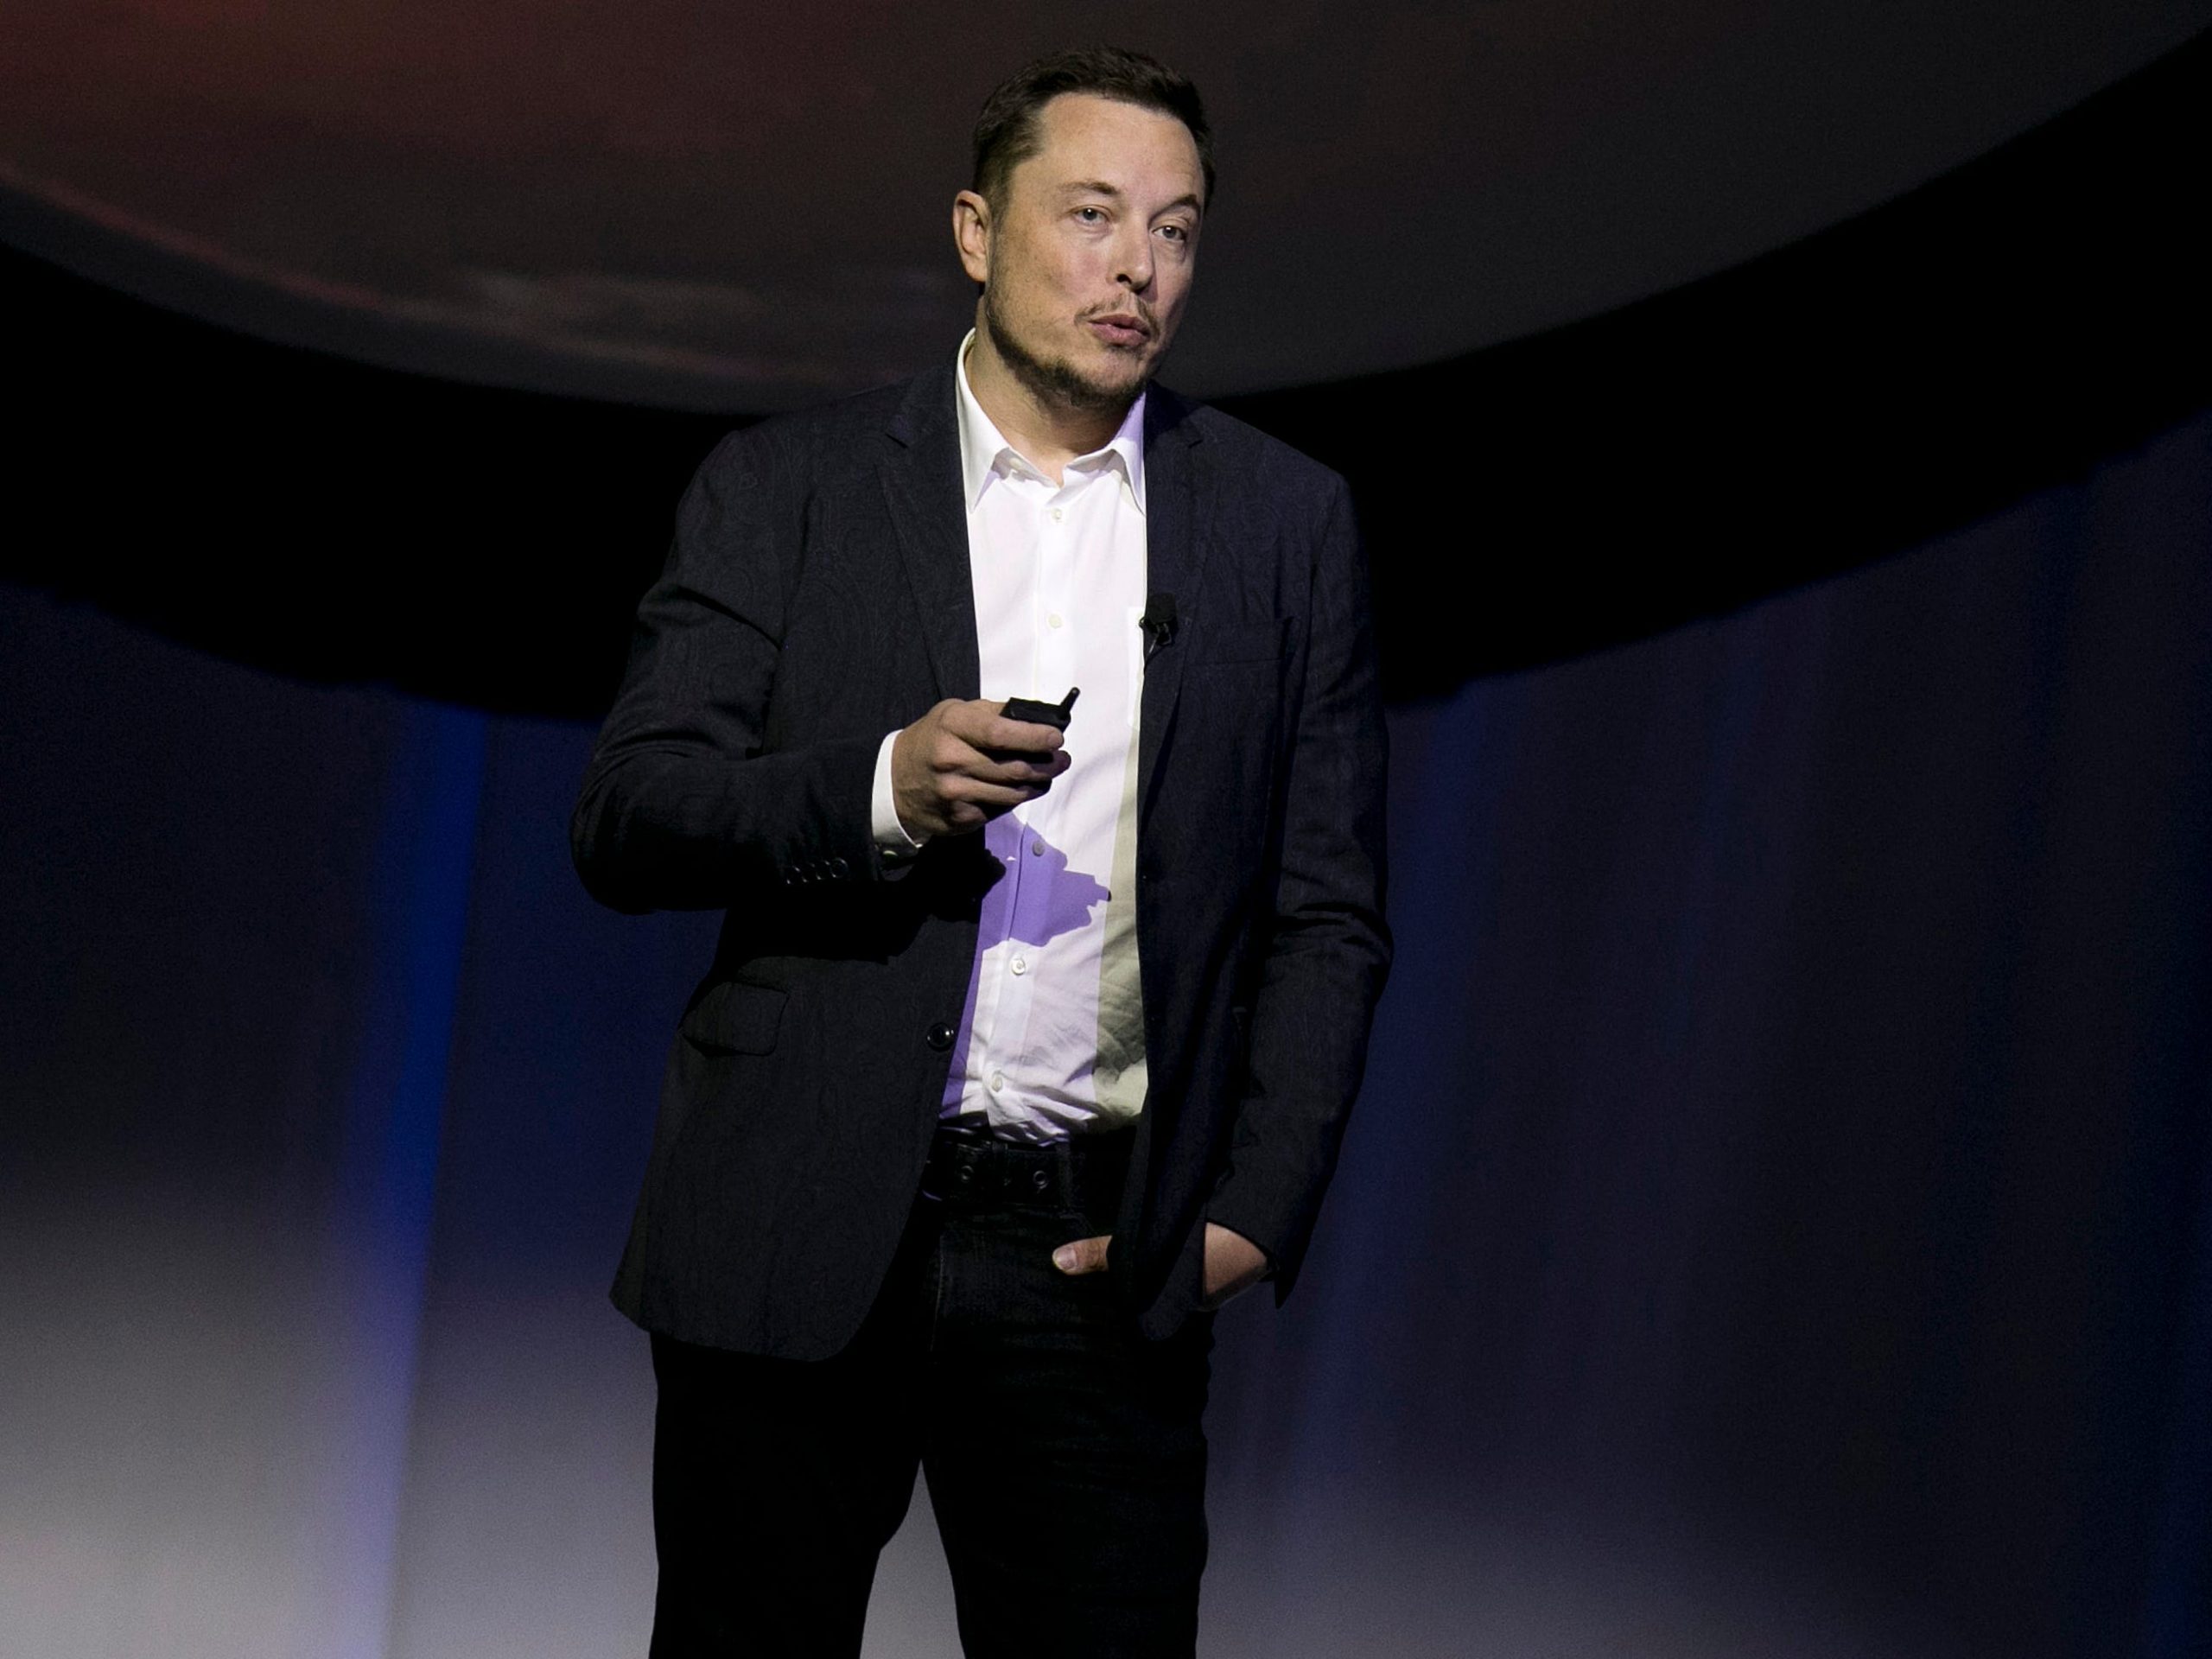 Elon Musk at a conference in Mexico.